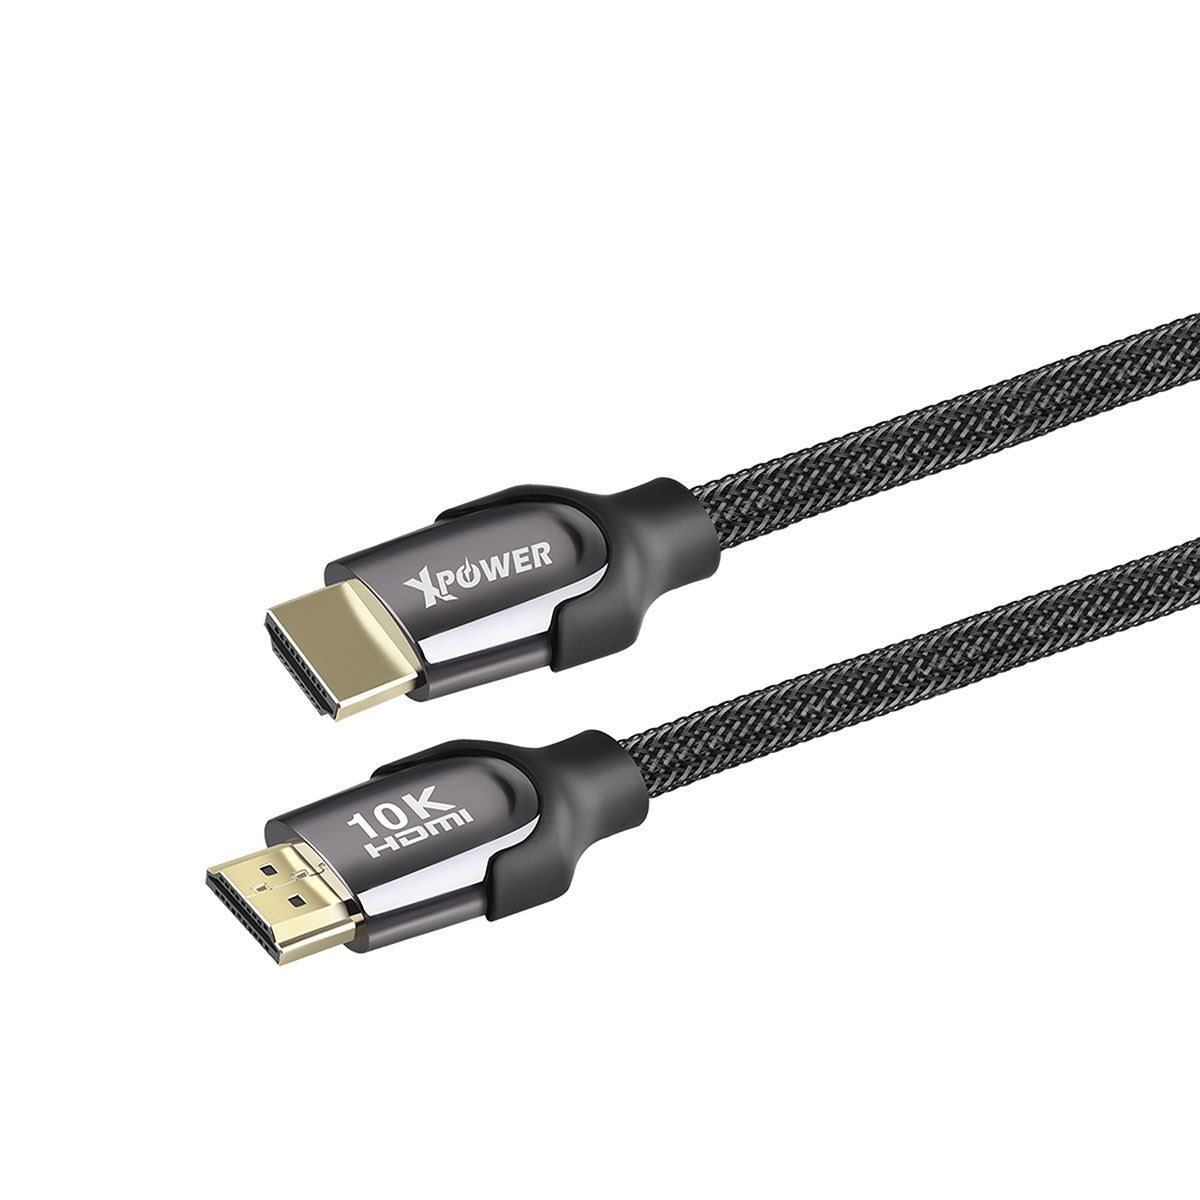 Xpower XP-HD10 10k hdmi cable